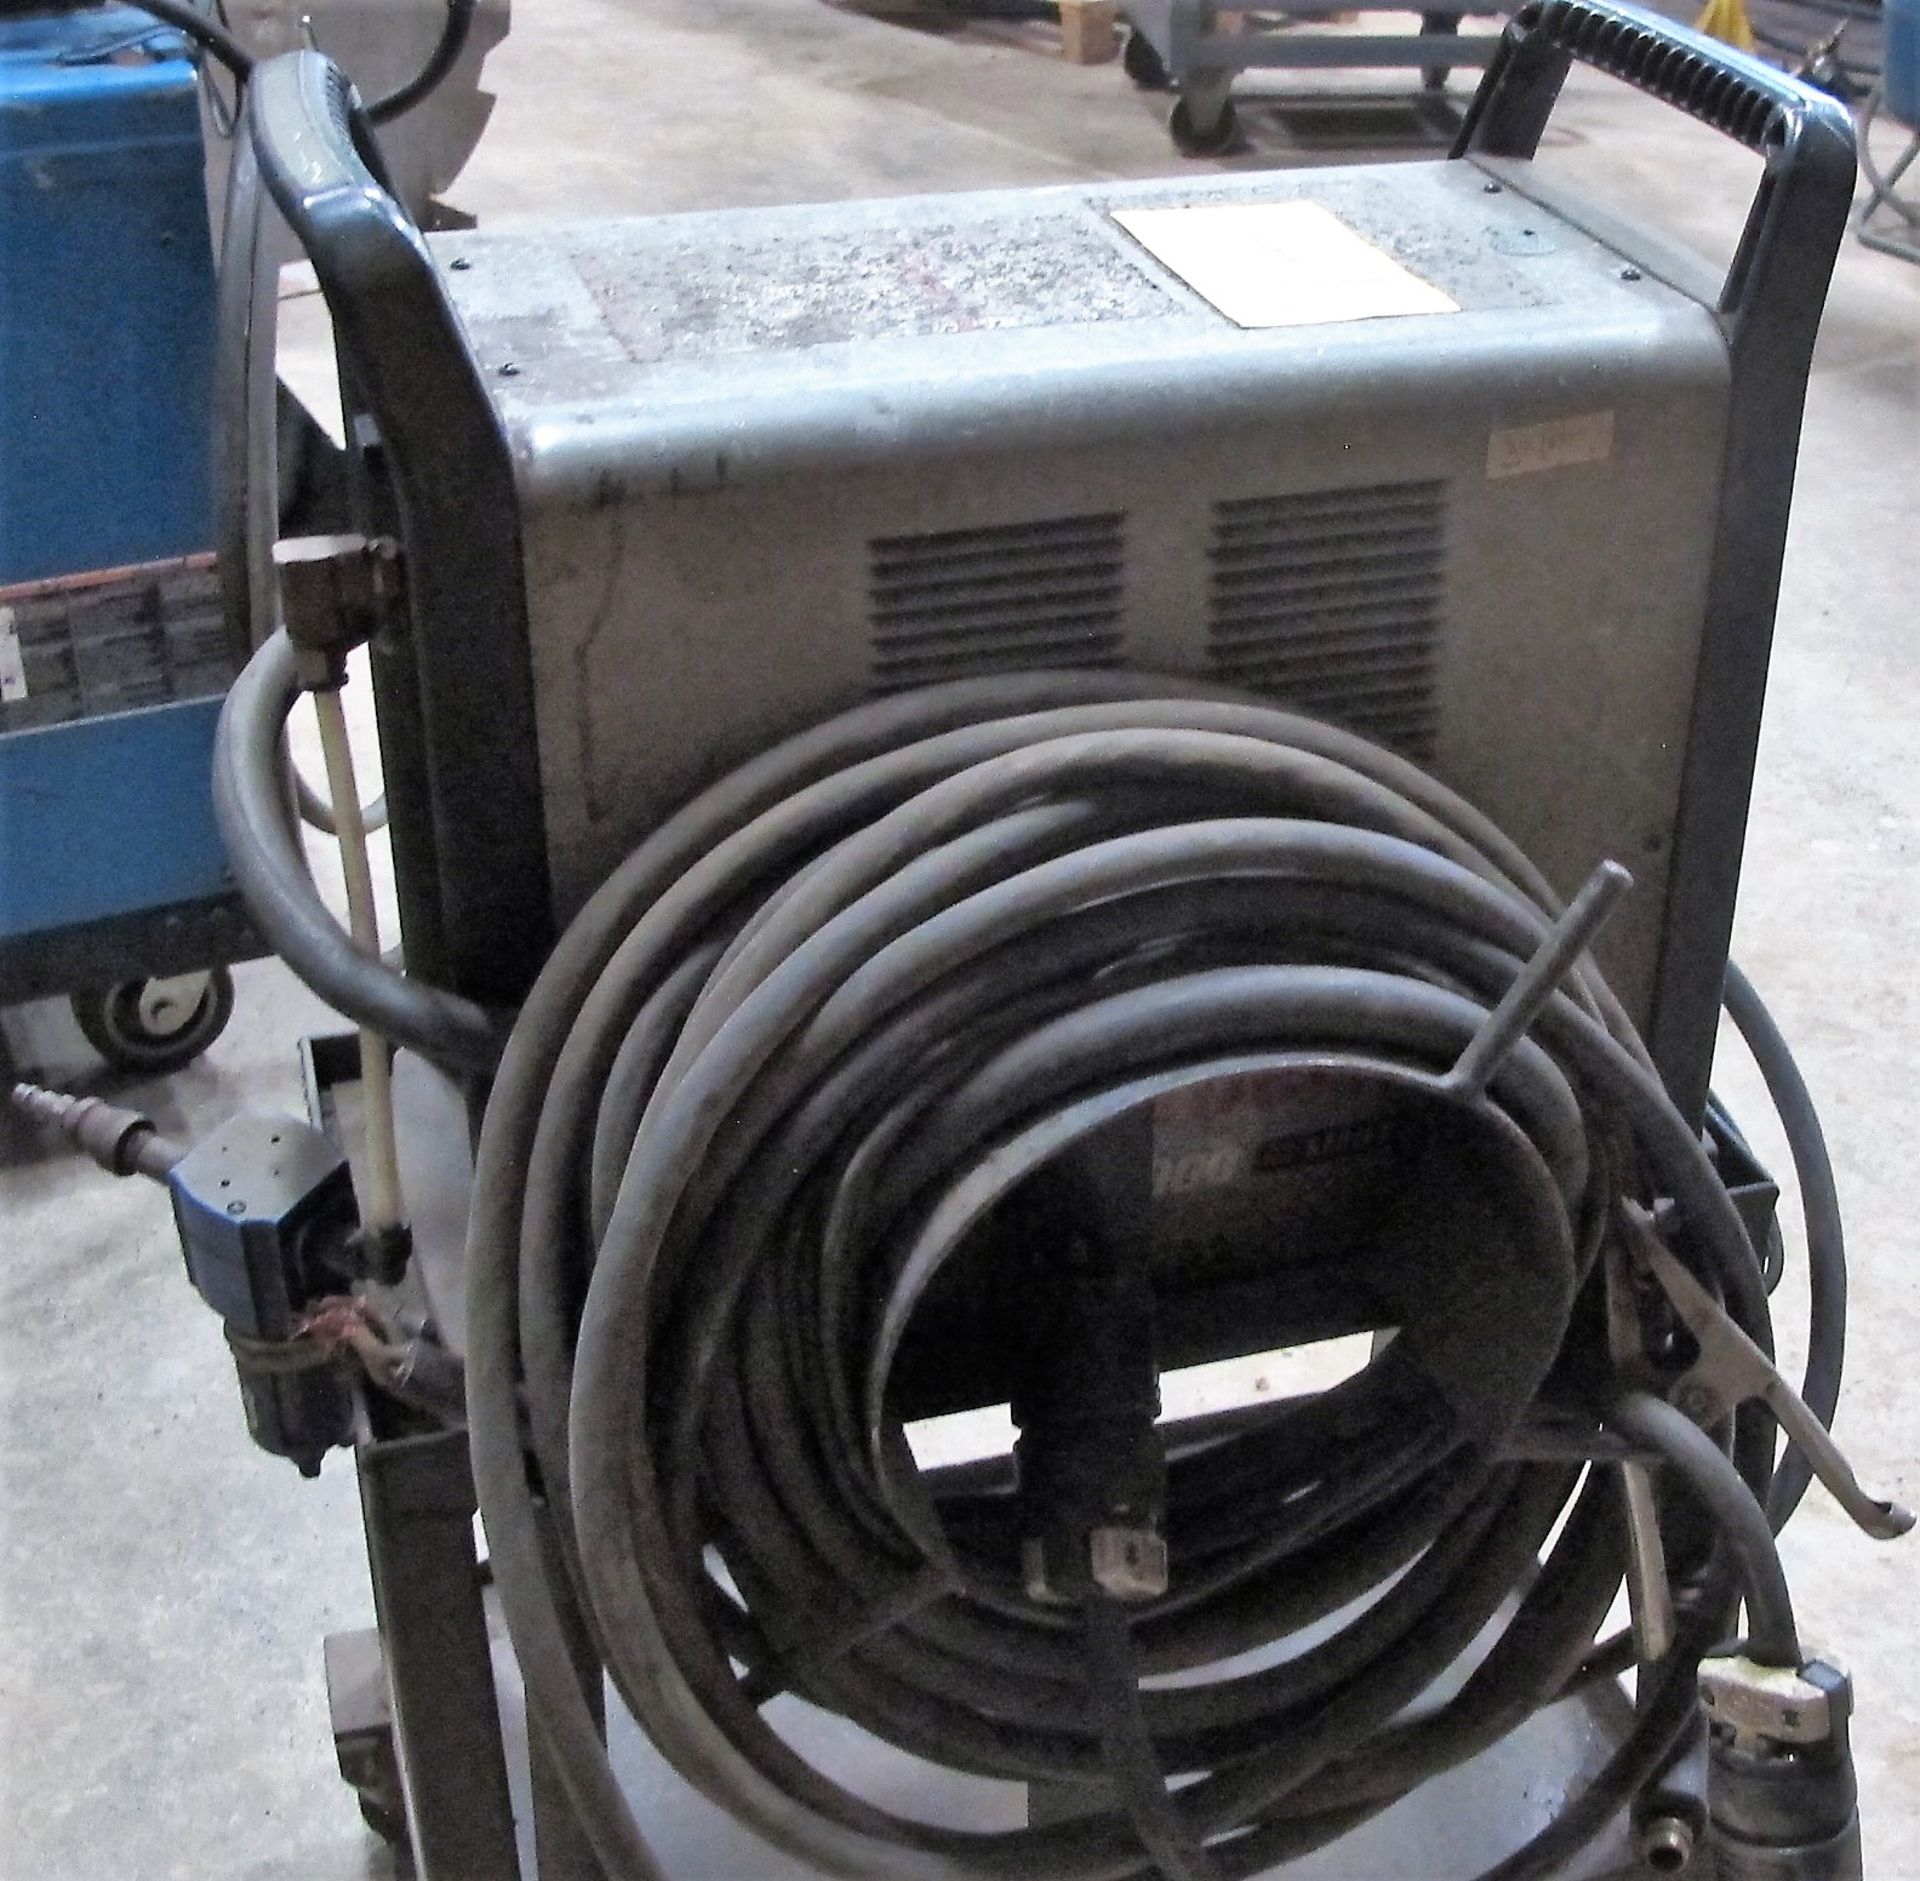 HYPERTHERM POWERMAX 1000, G3 SERIES, PLASMA CUTTER, S/N1000-031278 W/CABLES/CART - Image 2 of 3